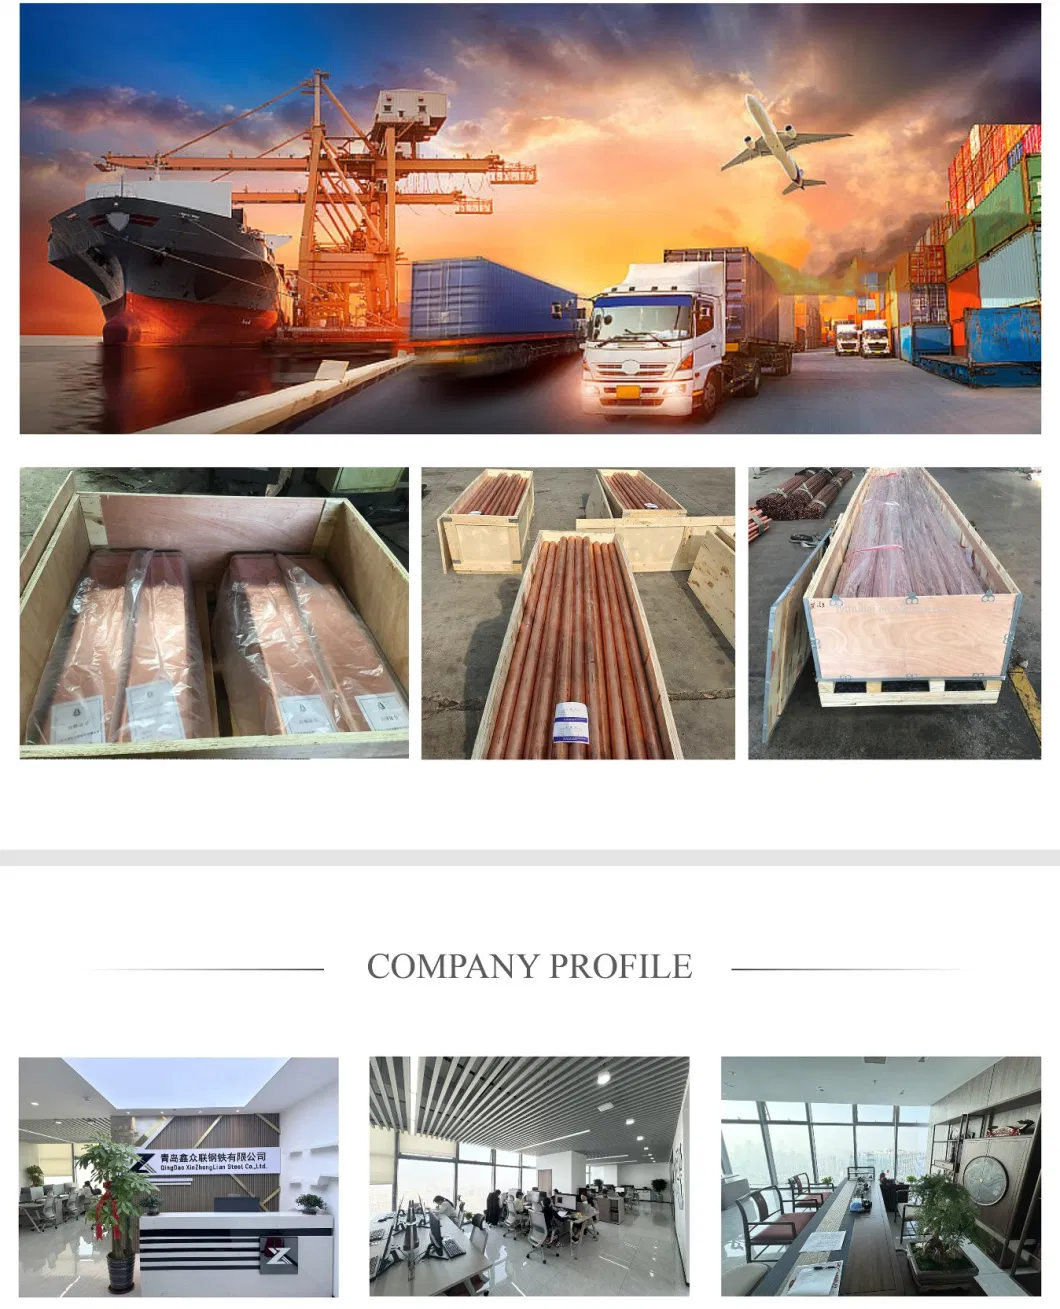 China Wholesale C11000 C60600 C12500 T2 C28000 C27000 Hsn70-1 Hsn62-1 Hsn60-1 Solid Round Square Flat White Red Brass Copper Wire Rod Bar Price